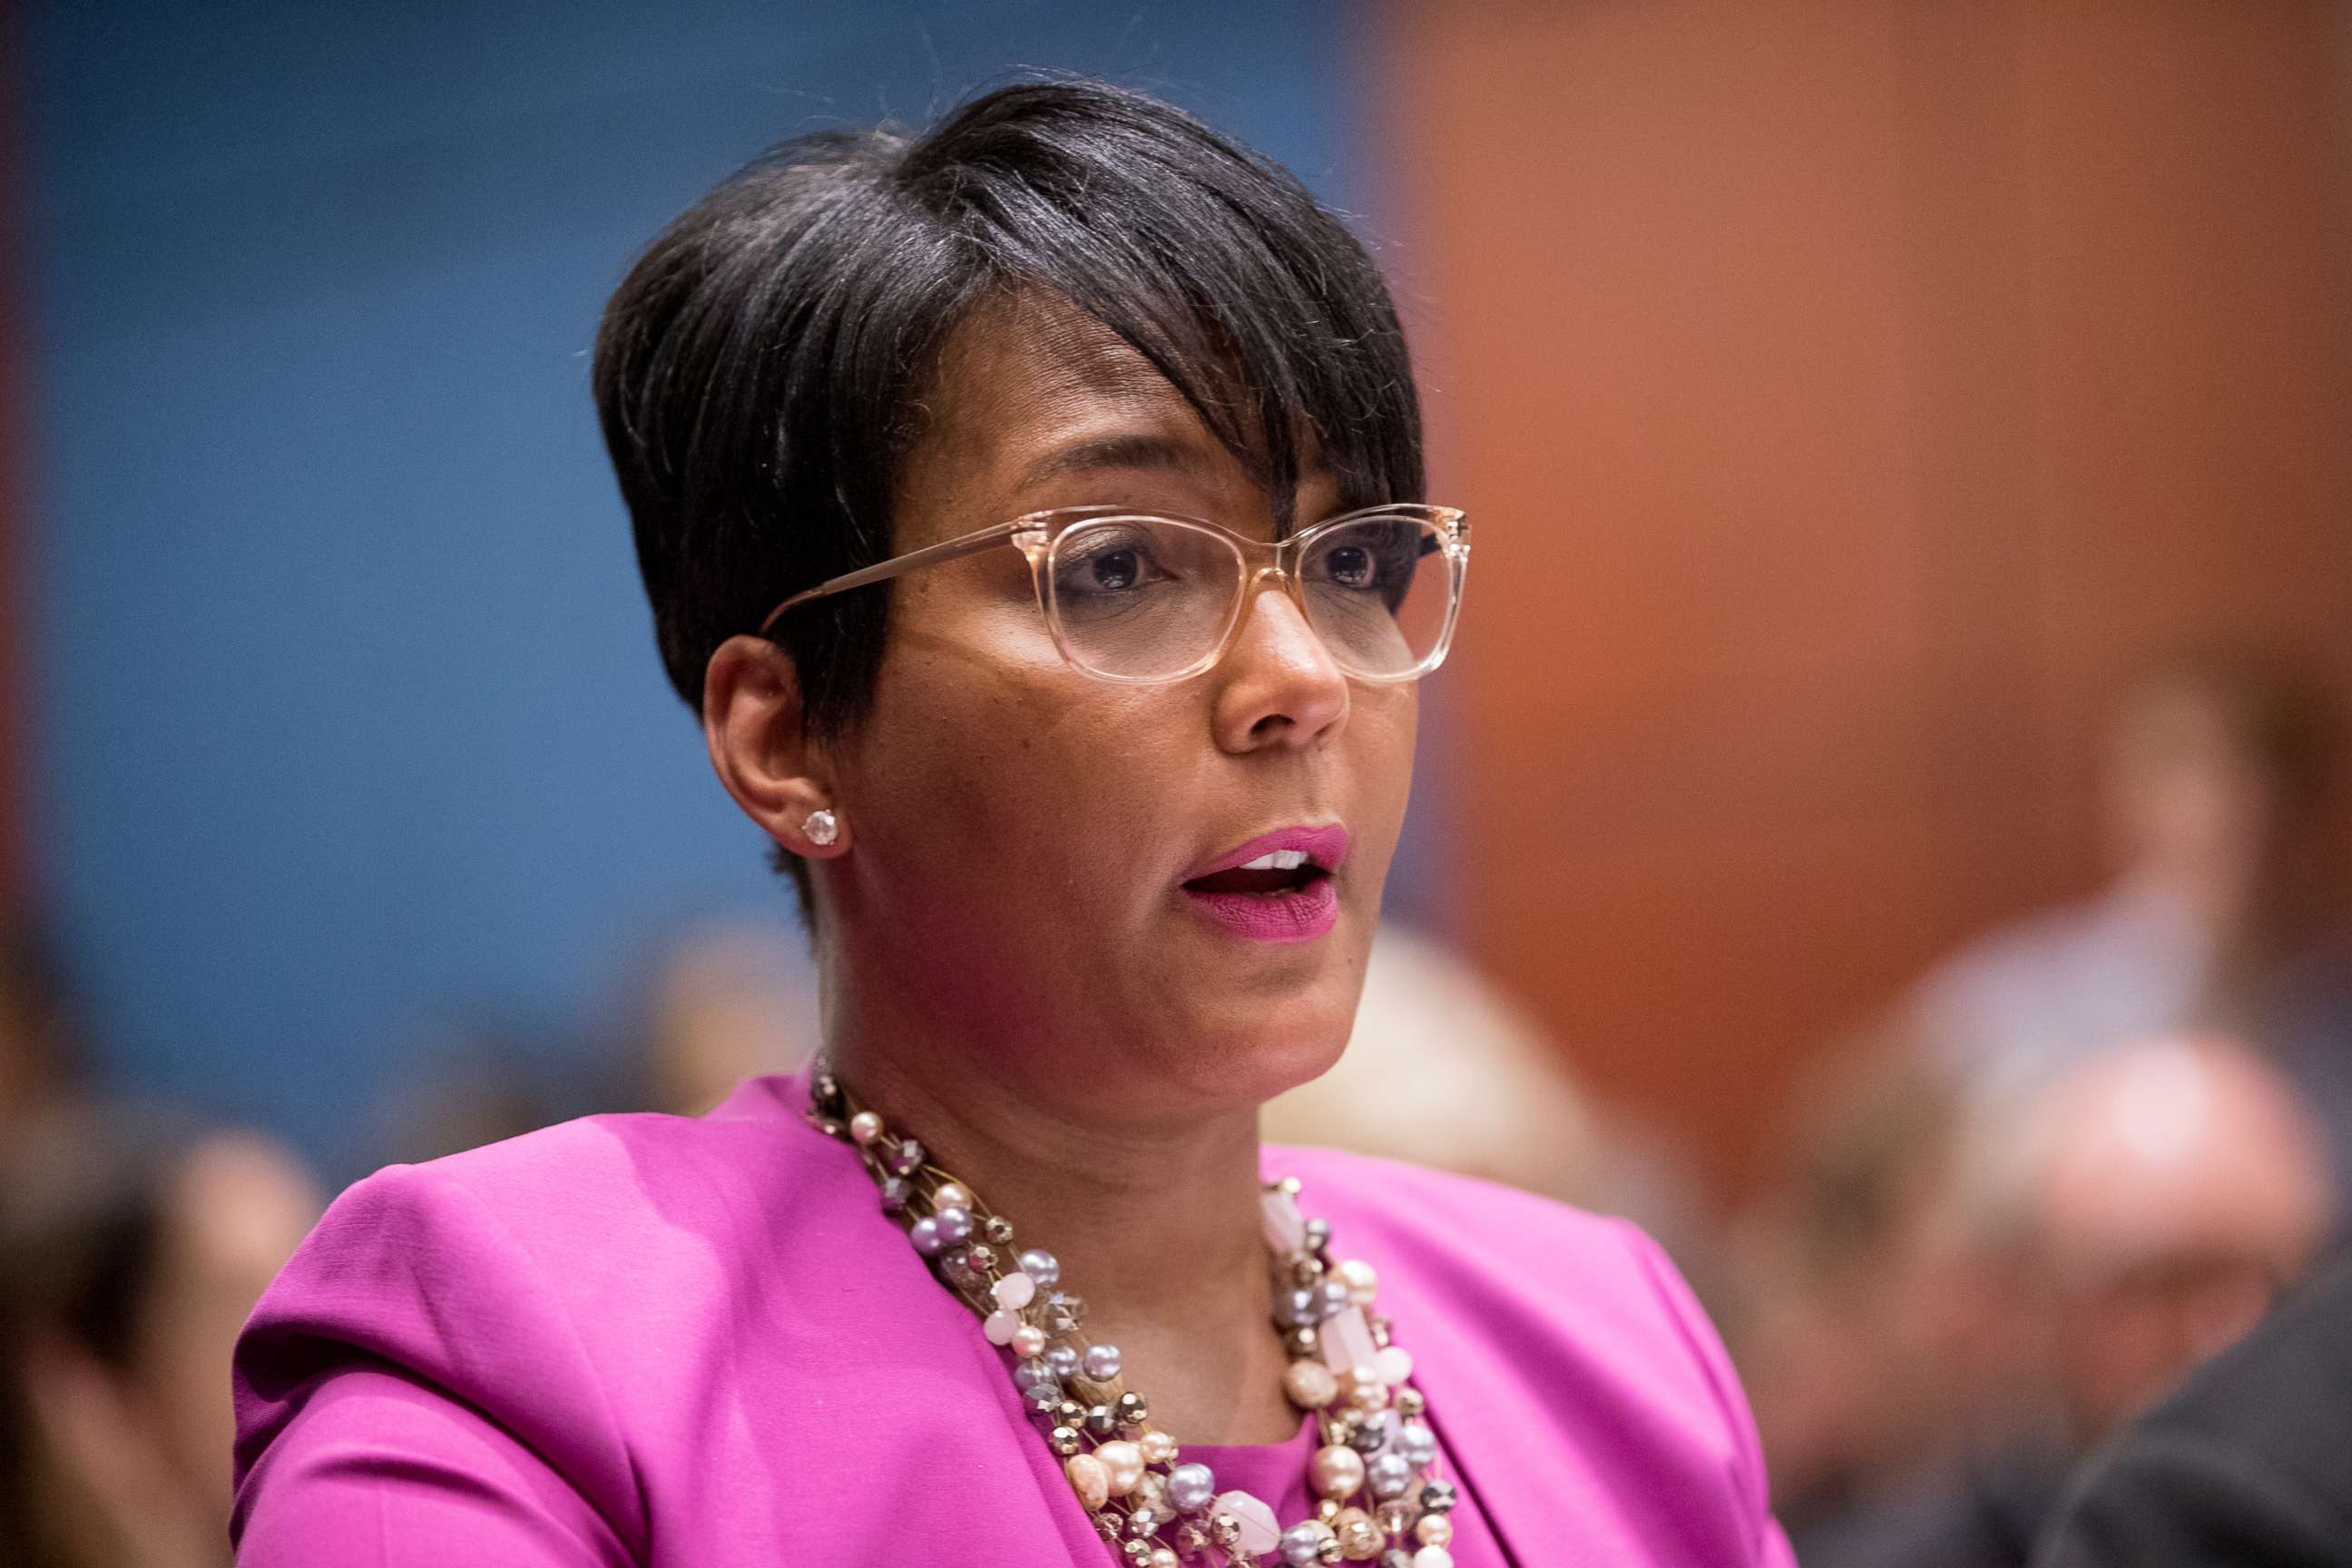 PHOTO: In this July 17, 2019, file photo, Atlanta Mayor Keisha Lance Bottoms speaks during a Senate Democrats' Special Committee on the Climate Crisis on Capitol Hill in Washington.